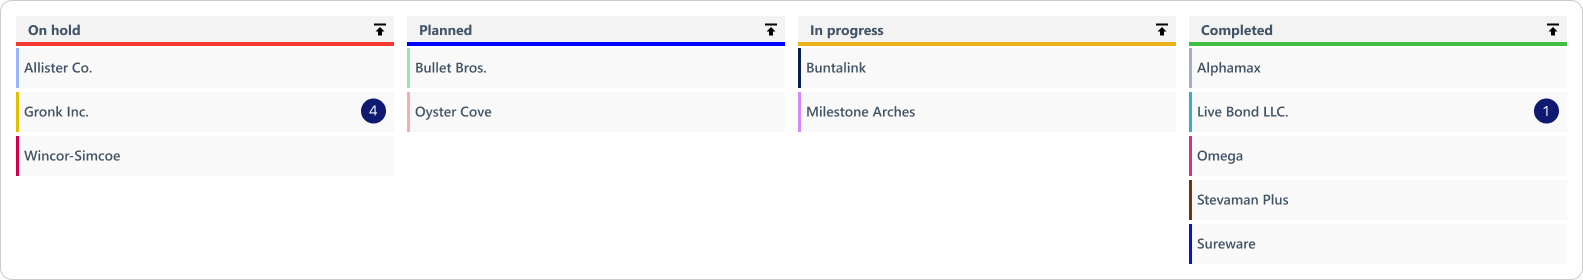 A traditional Kanban board created from project data fields in Ganttic.